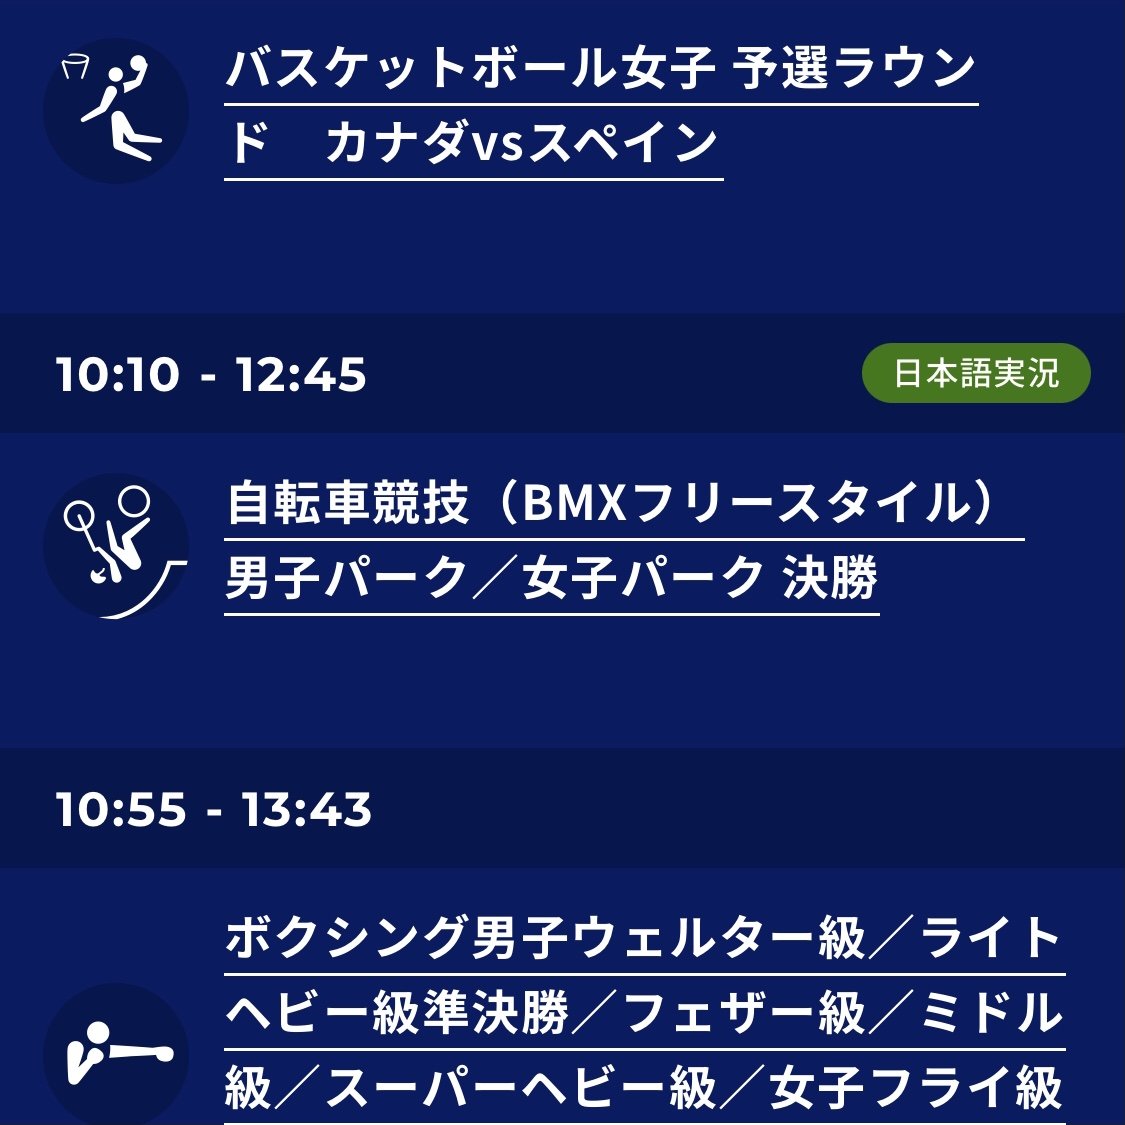 You are currently viewing BMXフリースタイルのLIVE配信をスマホで見る方法